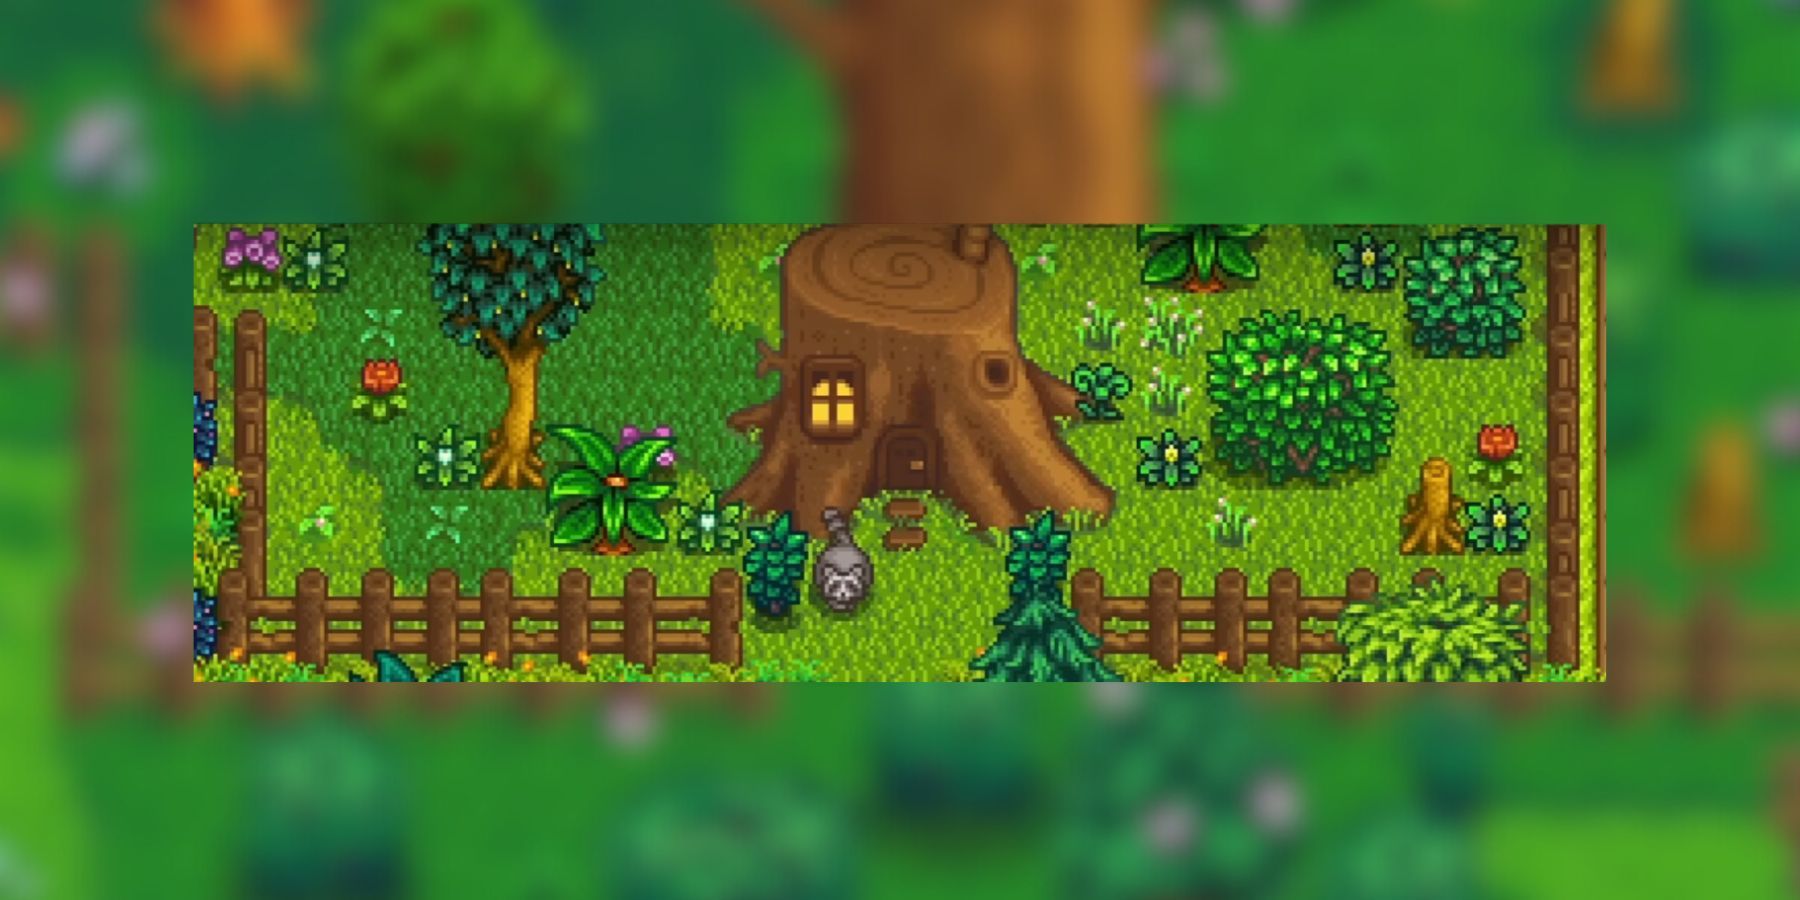 the raccoon in front of the giant stump in stardew valley.